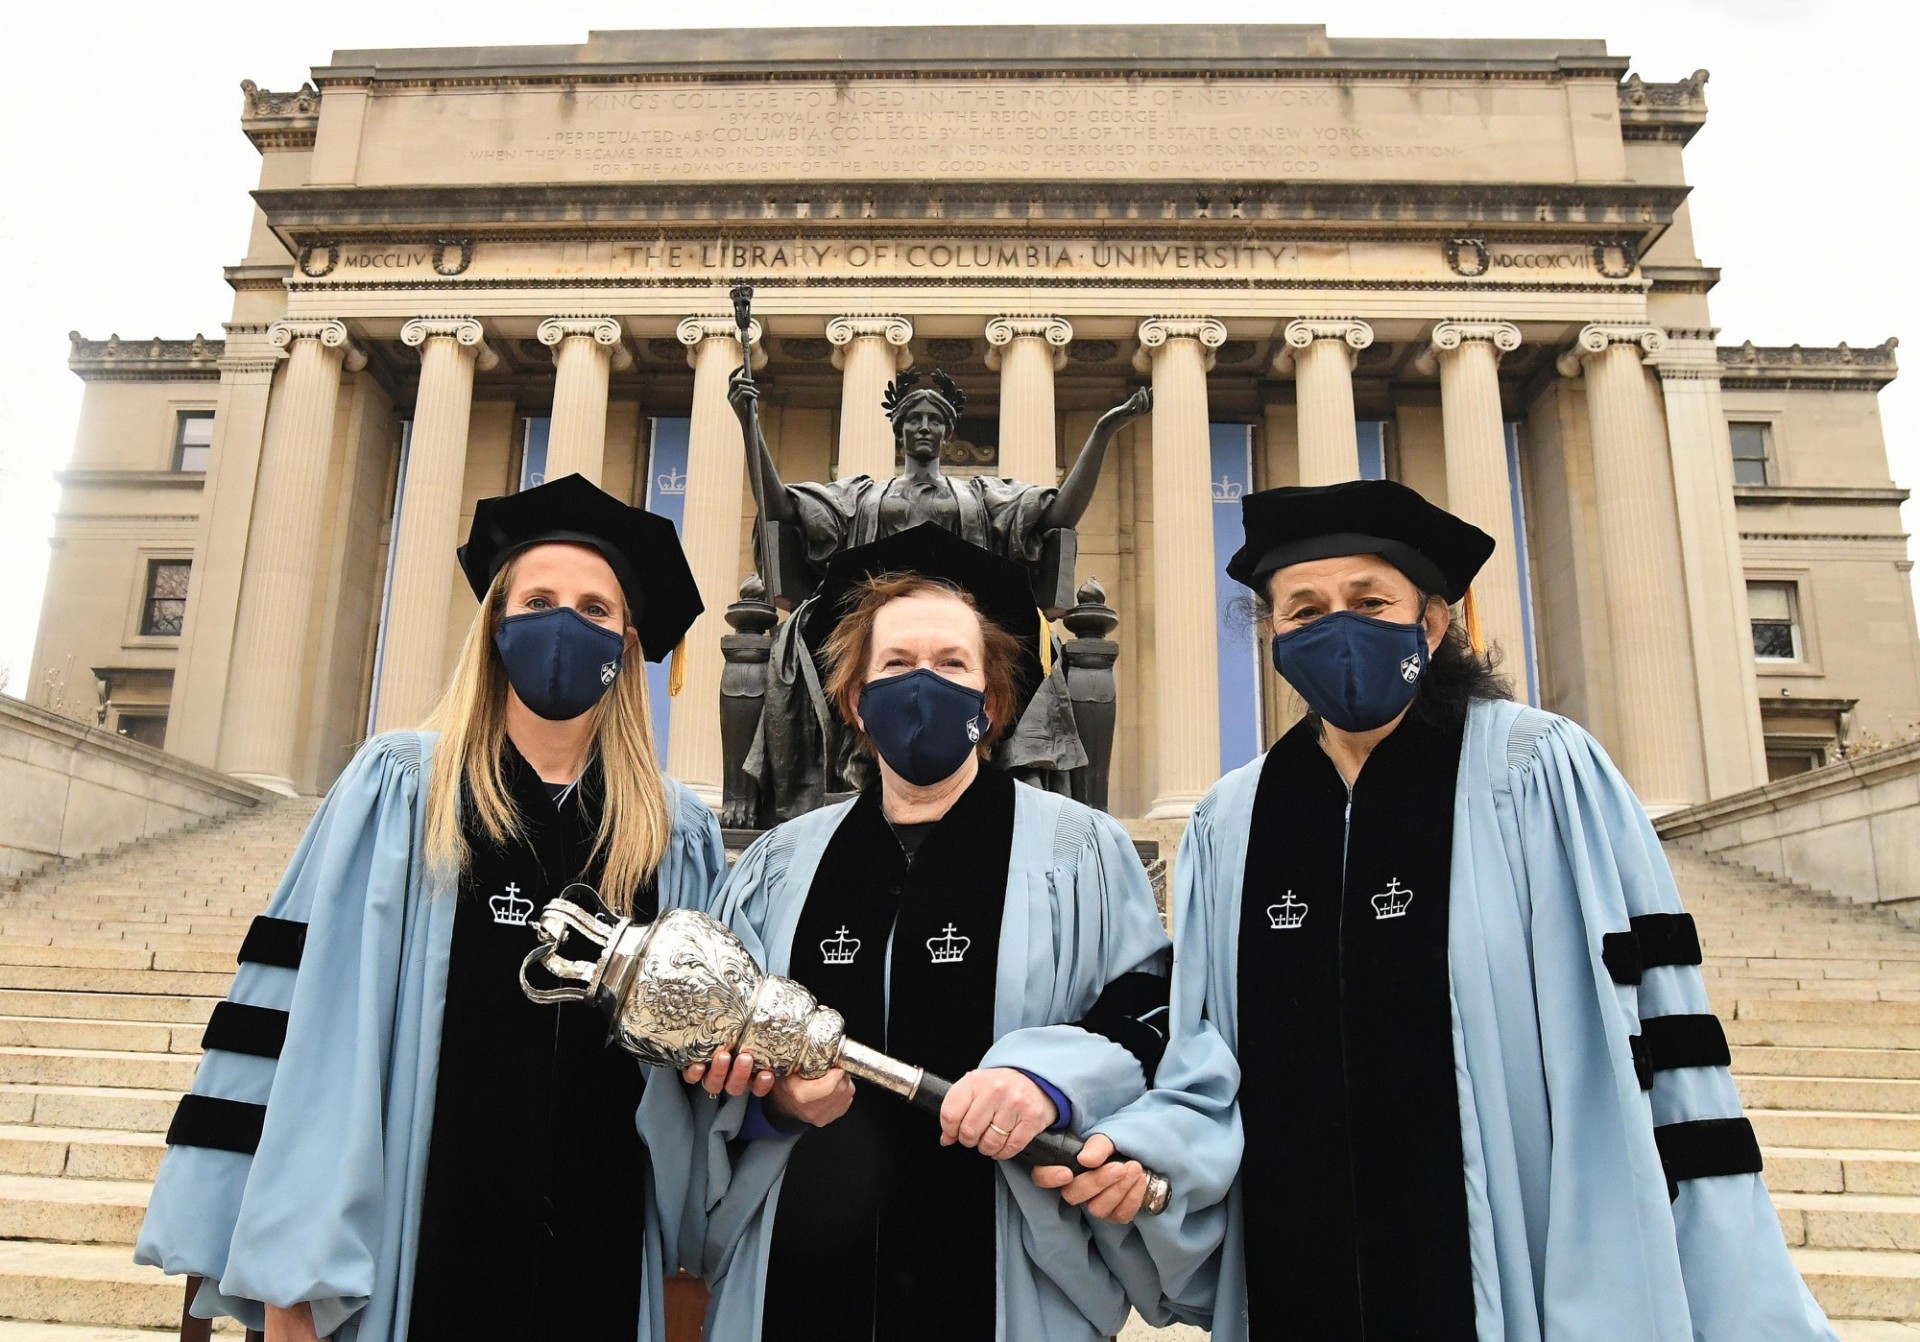 Wearing academic robes, Melanie J. Bernitz, Donna Lynne, and Wafaa El-Sadr hold the University Mace standing in front of Alma Mater.